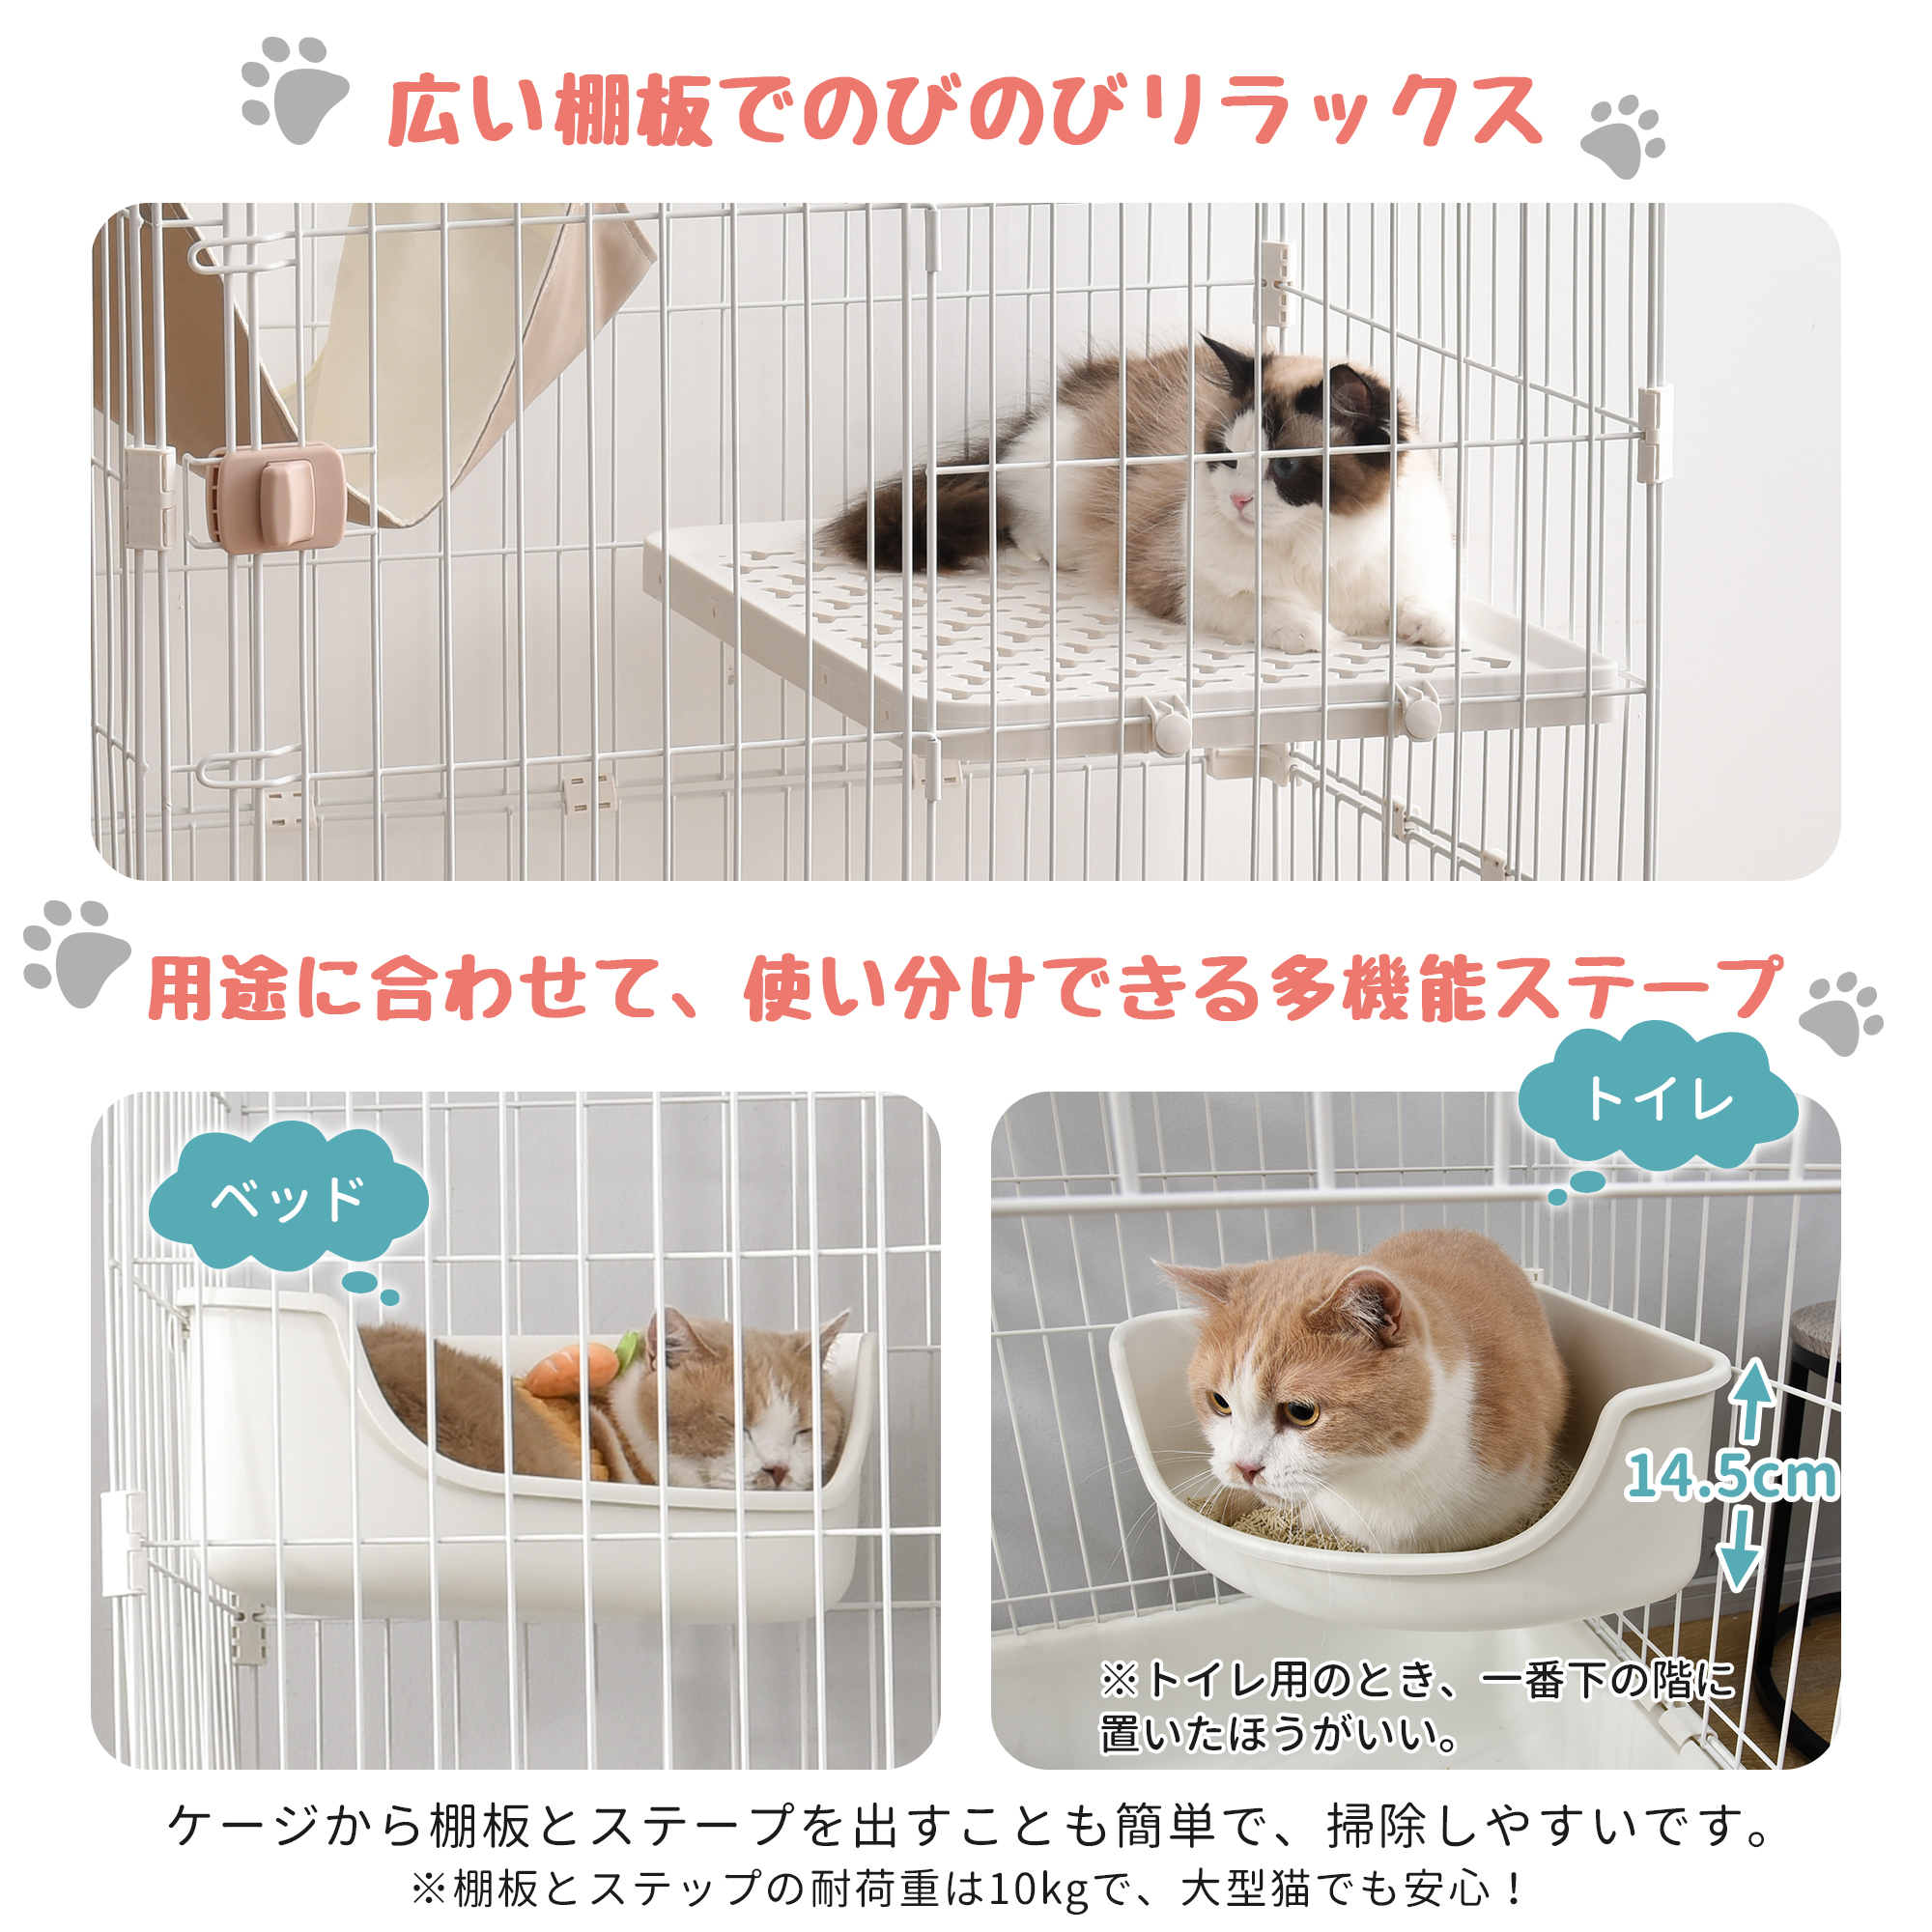 OUTLET 包装 即日発送 代引無料 猫 ケージ ハンモック付 キャット